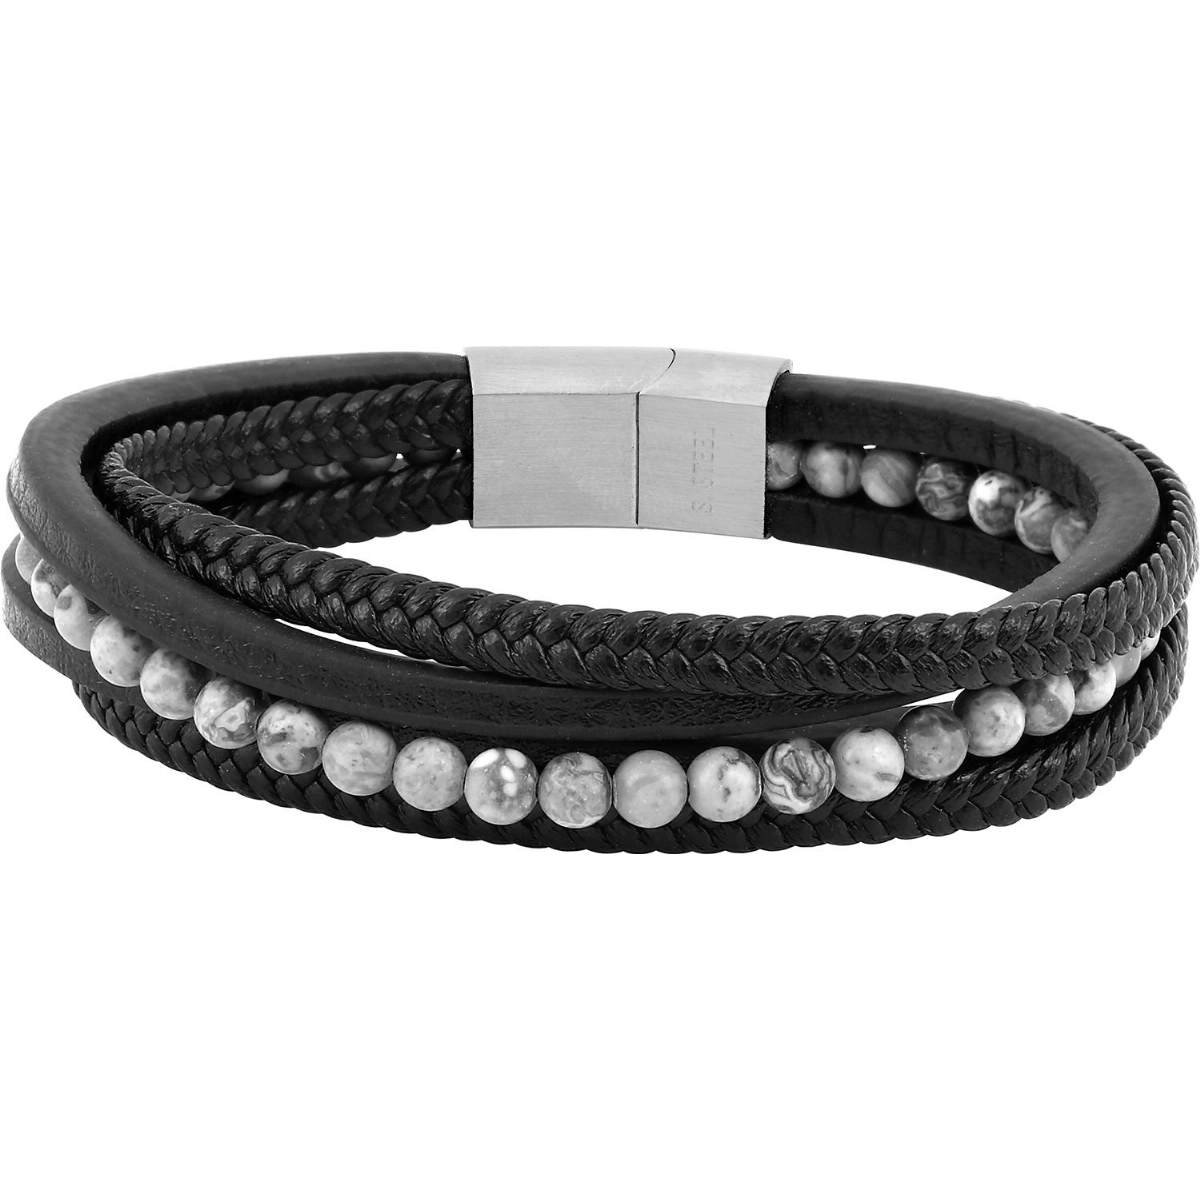 Pulsera blk.map gris  synth.blk.leather Acero Lua Blanca 526852.0